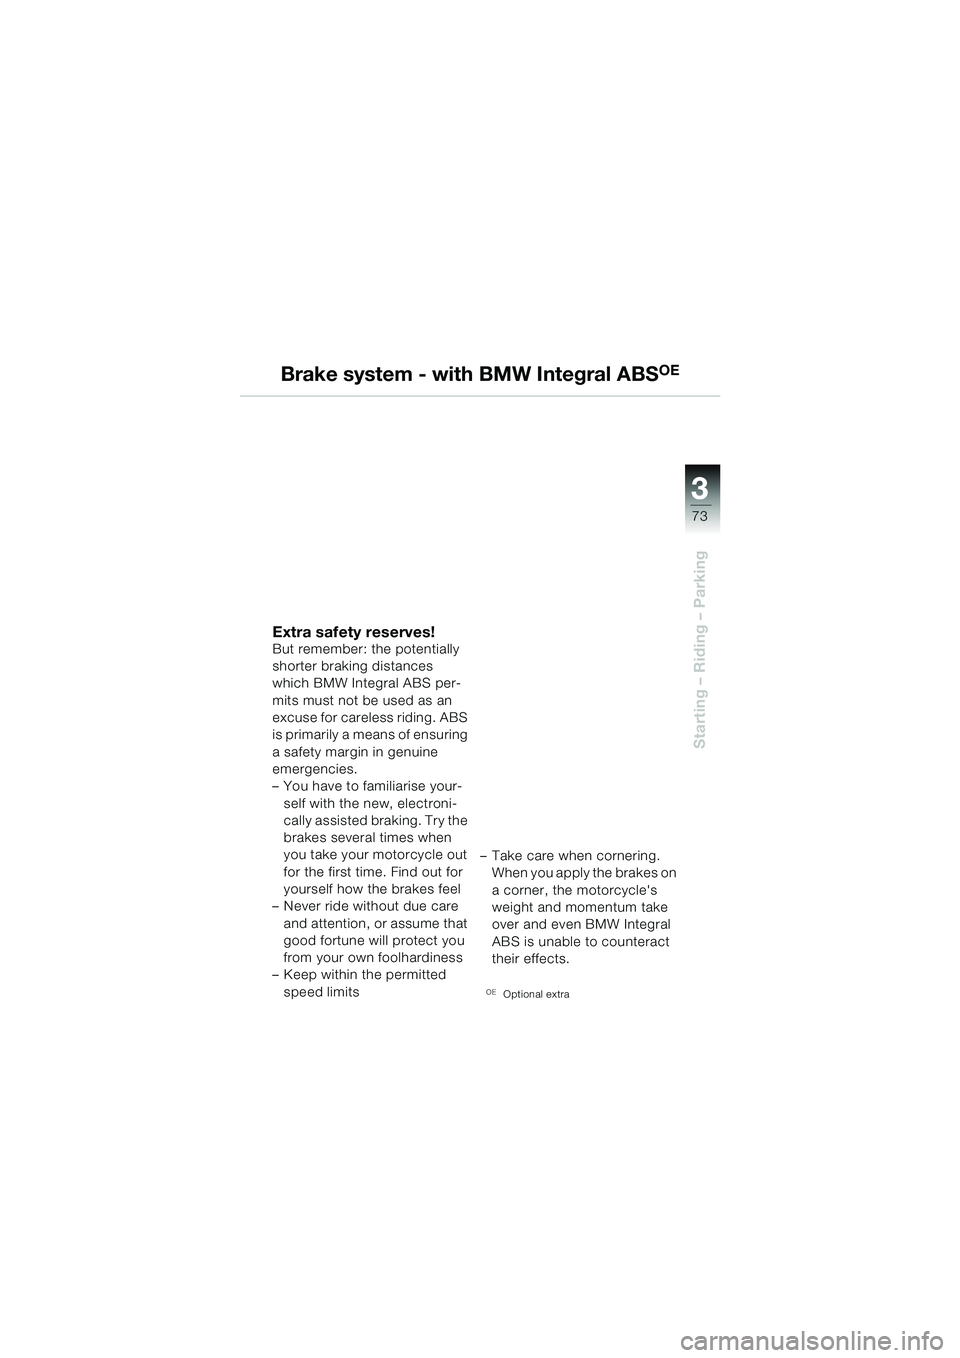 BMW MOTORRAD R 1150 RS 2002  Riders Manual (in English) 3
73
3
Starting – Riding – Parking
Brake system - with BMW Integral ABSOE
Extra safety reserves!But remember: the potentially 
shorter braking distances 
which BMW Integral ABS per-
mits must not 